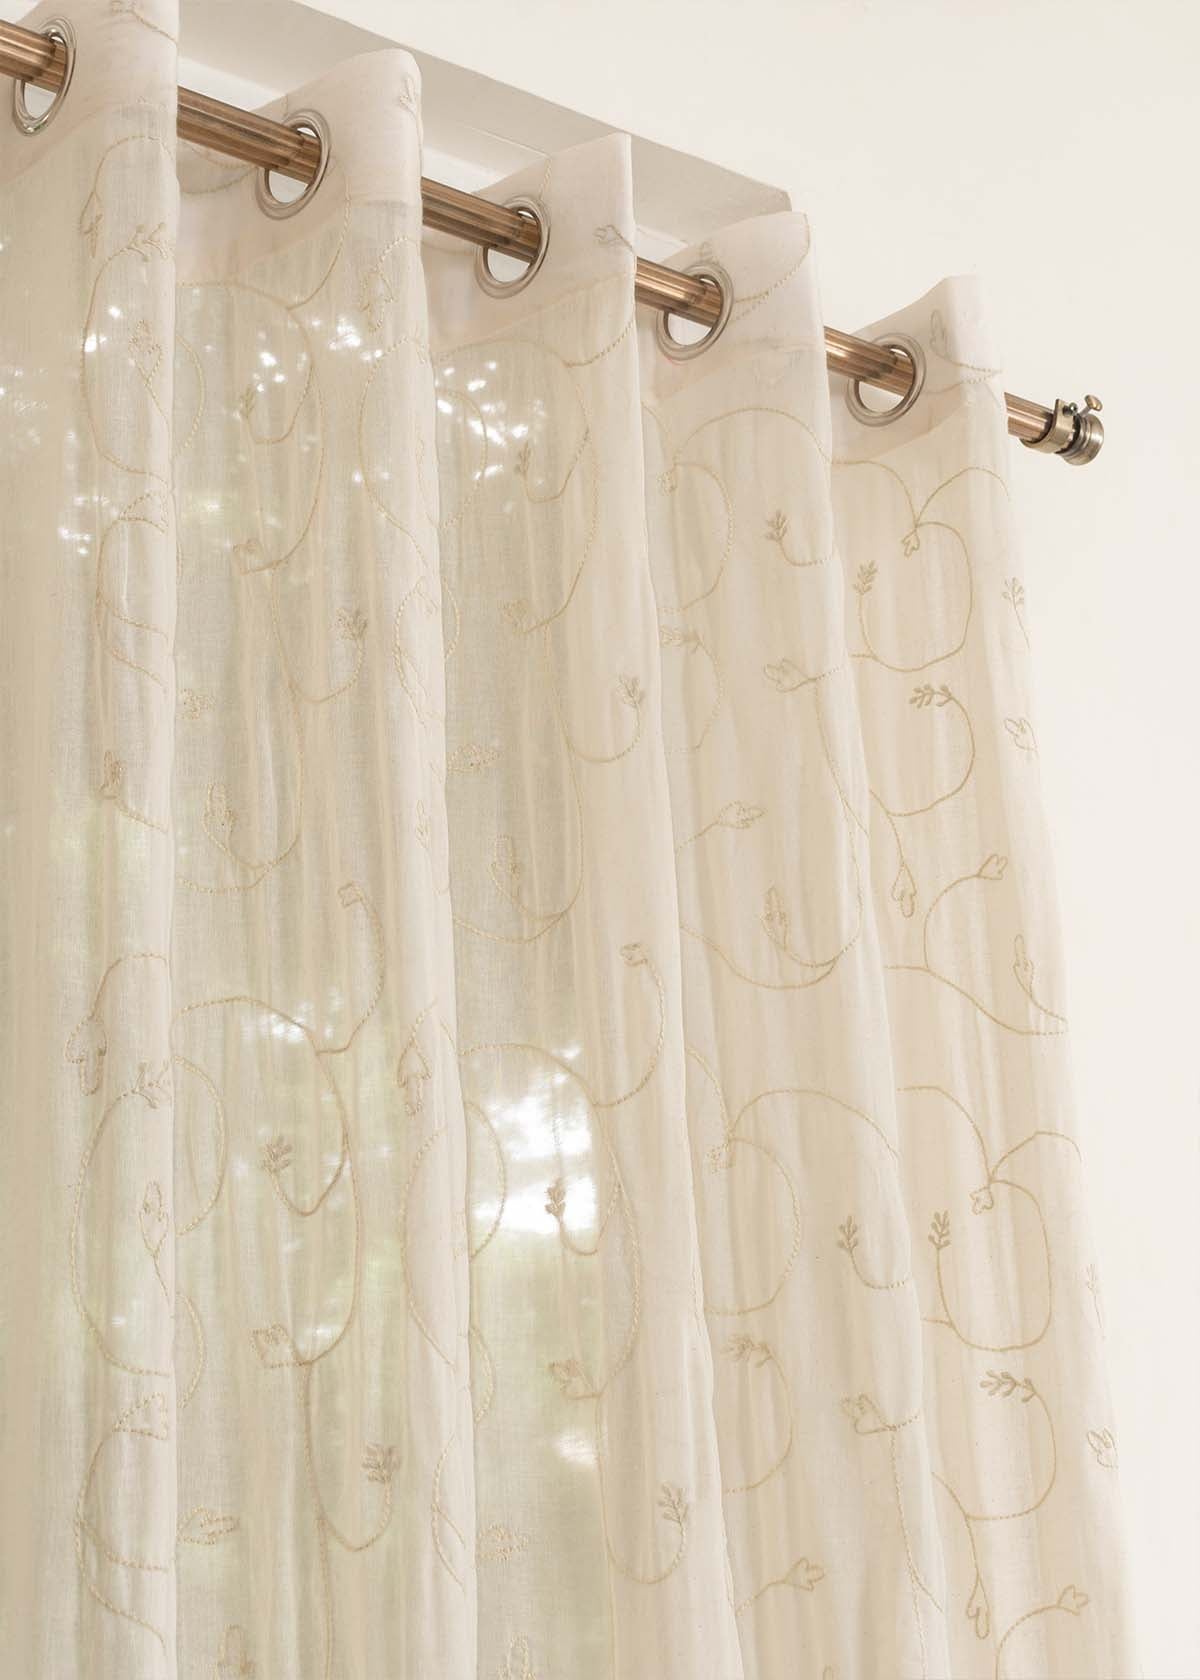 Ivy Vines Embroidered Sheer Curtain - Cream - Single